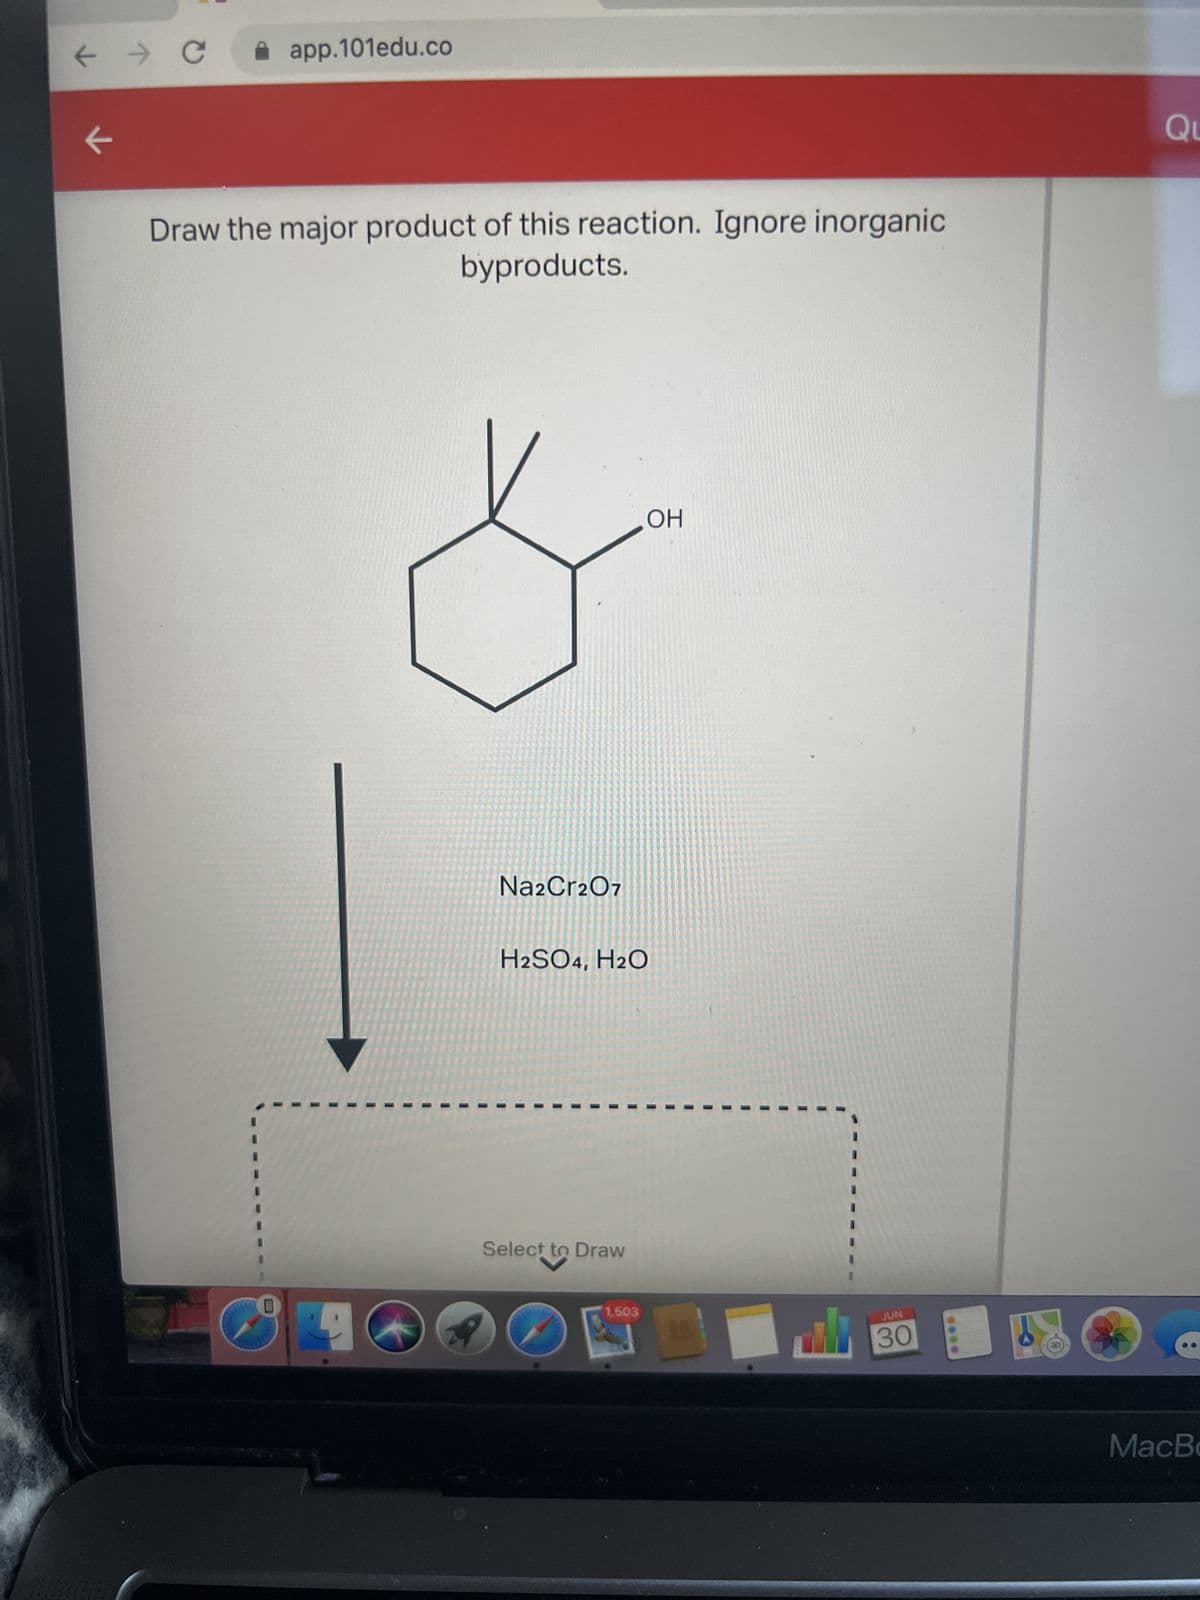 ← → C ✰ app.101edu.co
←
Draw the major product of this reaction. Ignore inorganic
byproducts.
0
I
I
Na2Cr2O7
H2SO4, H2O
I
I
1
1
1
Select to Draw
I
1,503
OH
ali
JUN
30
Qu
MacBo